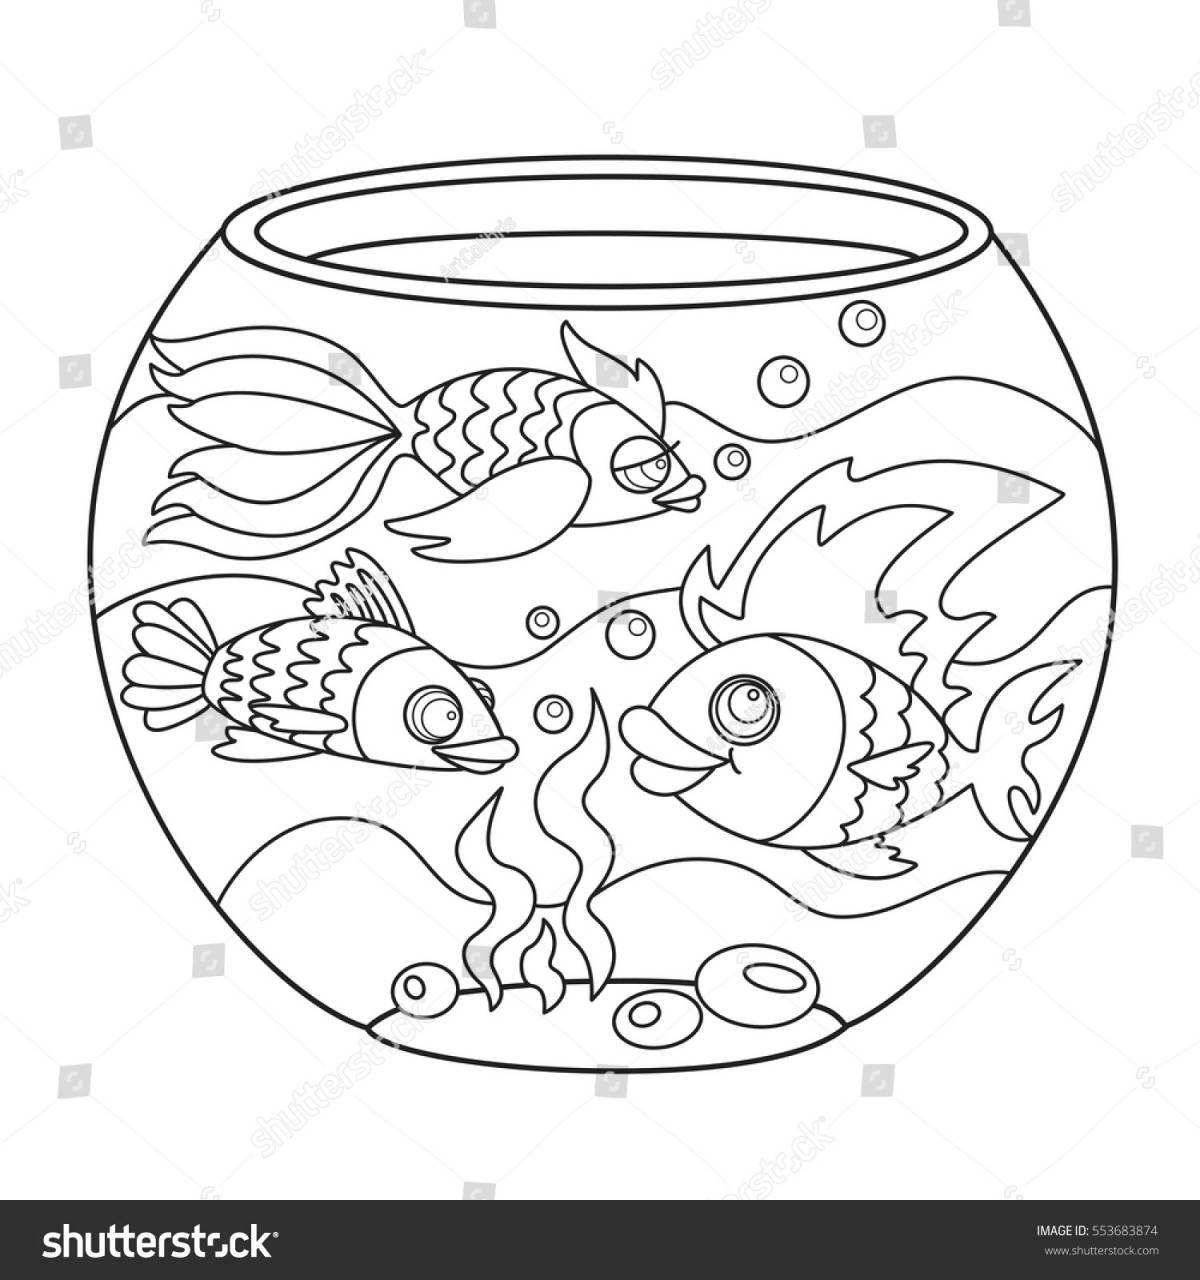 Sweet aquarium coloring book for 3-4 year olds